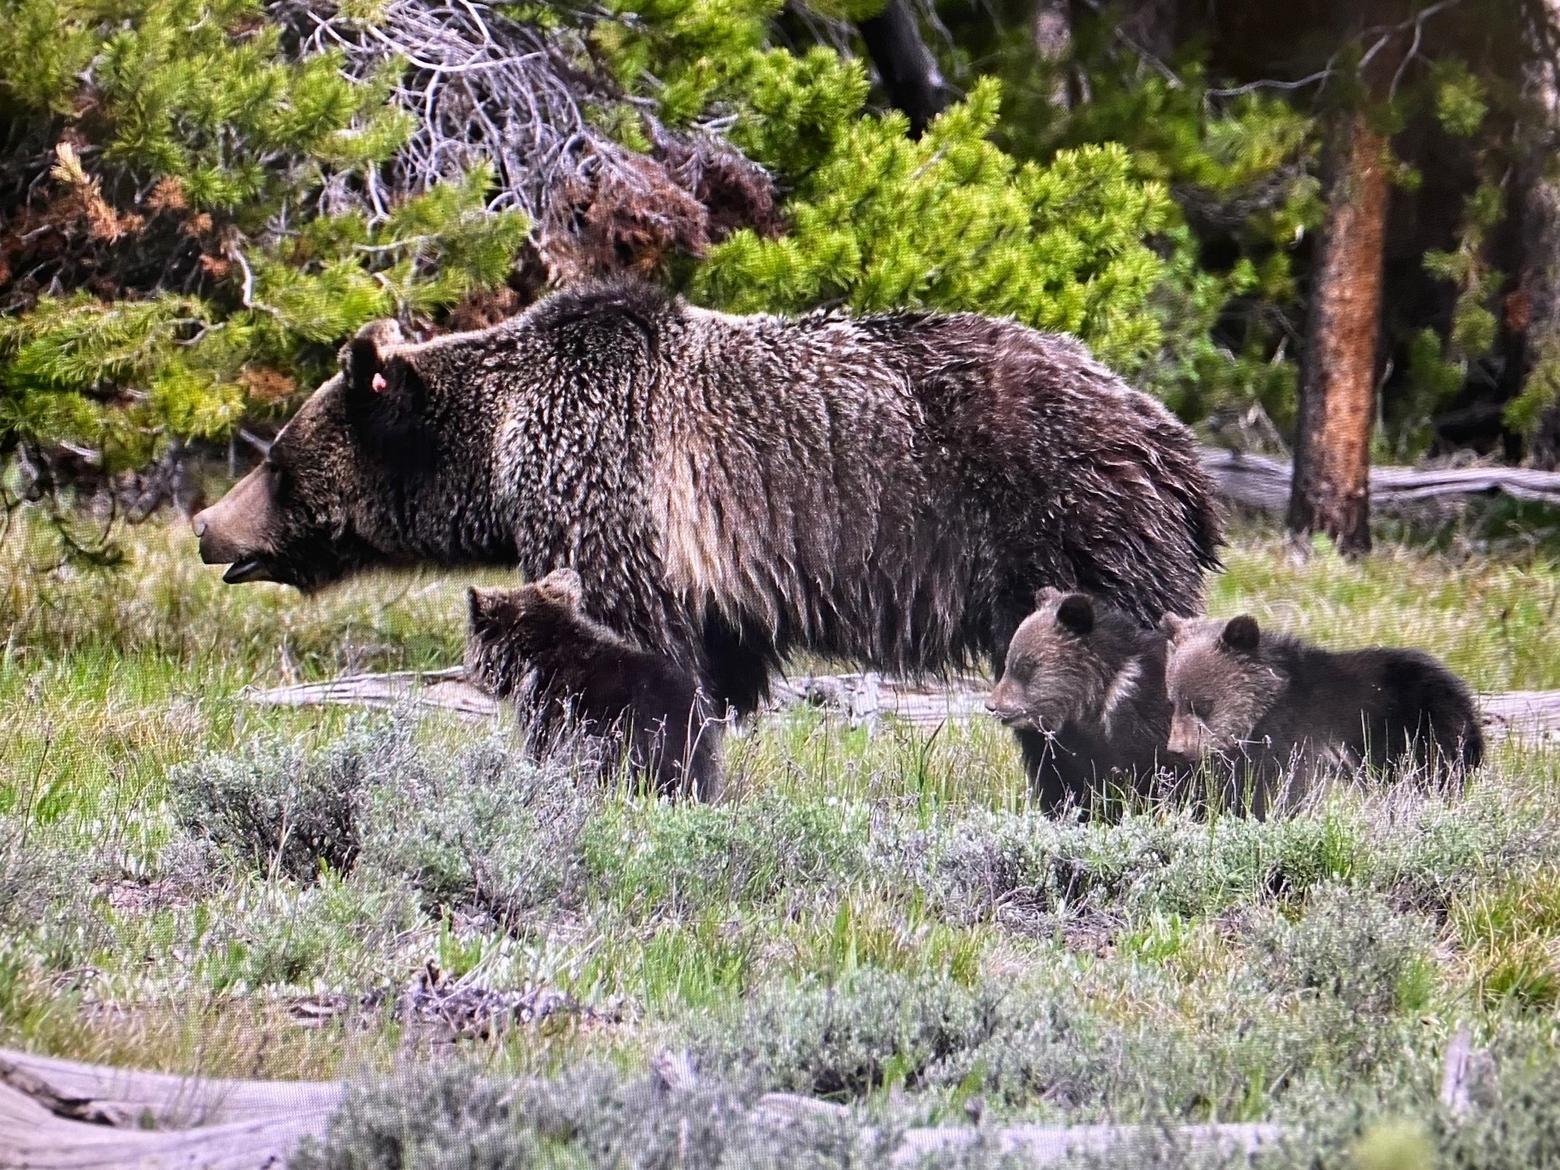 The fragility of survival: a photo of the Jackson Hole mother grizzly, nicknamed "Blondie" with her triplet cubs of the year in Grand Teton National Park. This picture of Blondie, no relation to 399, was taken by Sue Cedarholm on the evening of June 11, 2022. The next day, the cubs had disappeared and Blondie was observed frantically searching for them. No one knows that happened. Bear biologists say they might have been killed by a male grizzly. Tom Mangelsen and others believe they may have gotten separated from their mother if Blondie was caught in a culvert trap set by researchers to catch, collar or tag a bear. That scenario was denied by government  officials. Mangelsen has been an outspoken critic of researchers conducting trapping operations in areas known to be inhabited by mother grizzlies and young cubs. Photo courtesy Sue Cedarholm. See her photography and fine art at @suecedarholm on Instagram